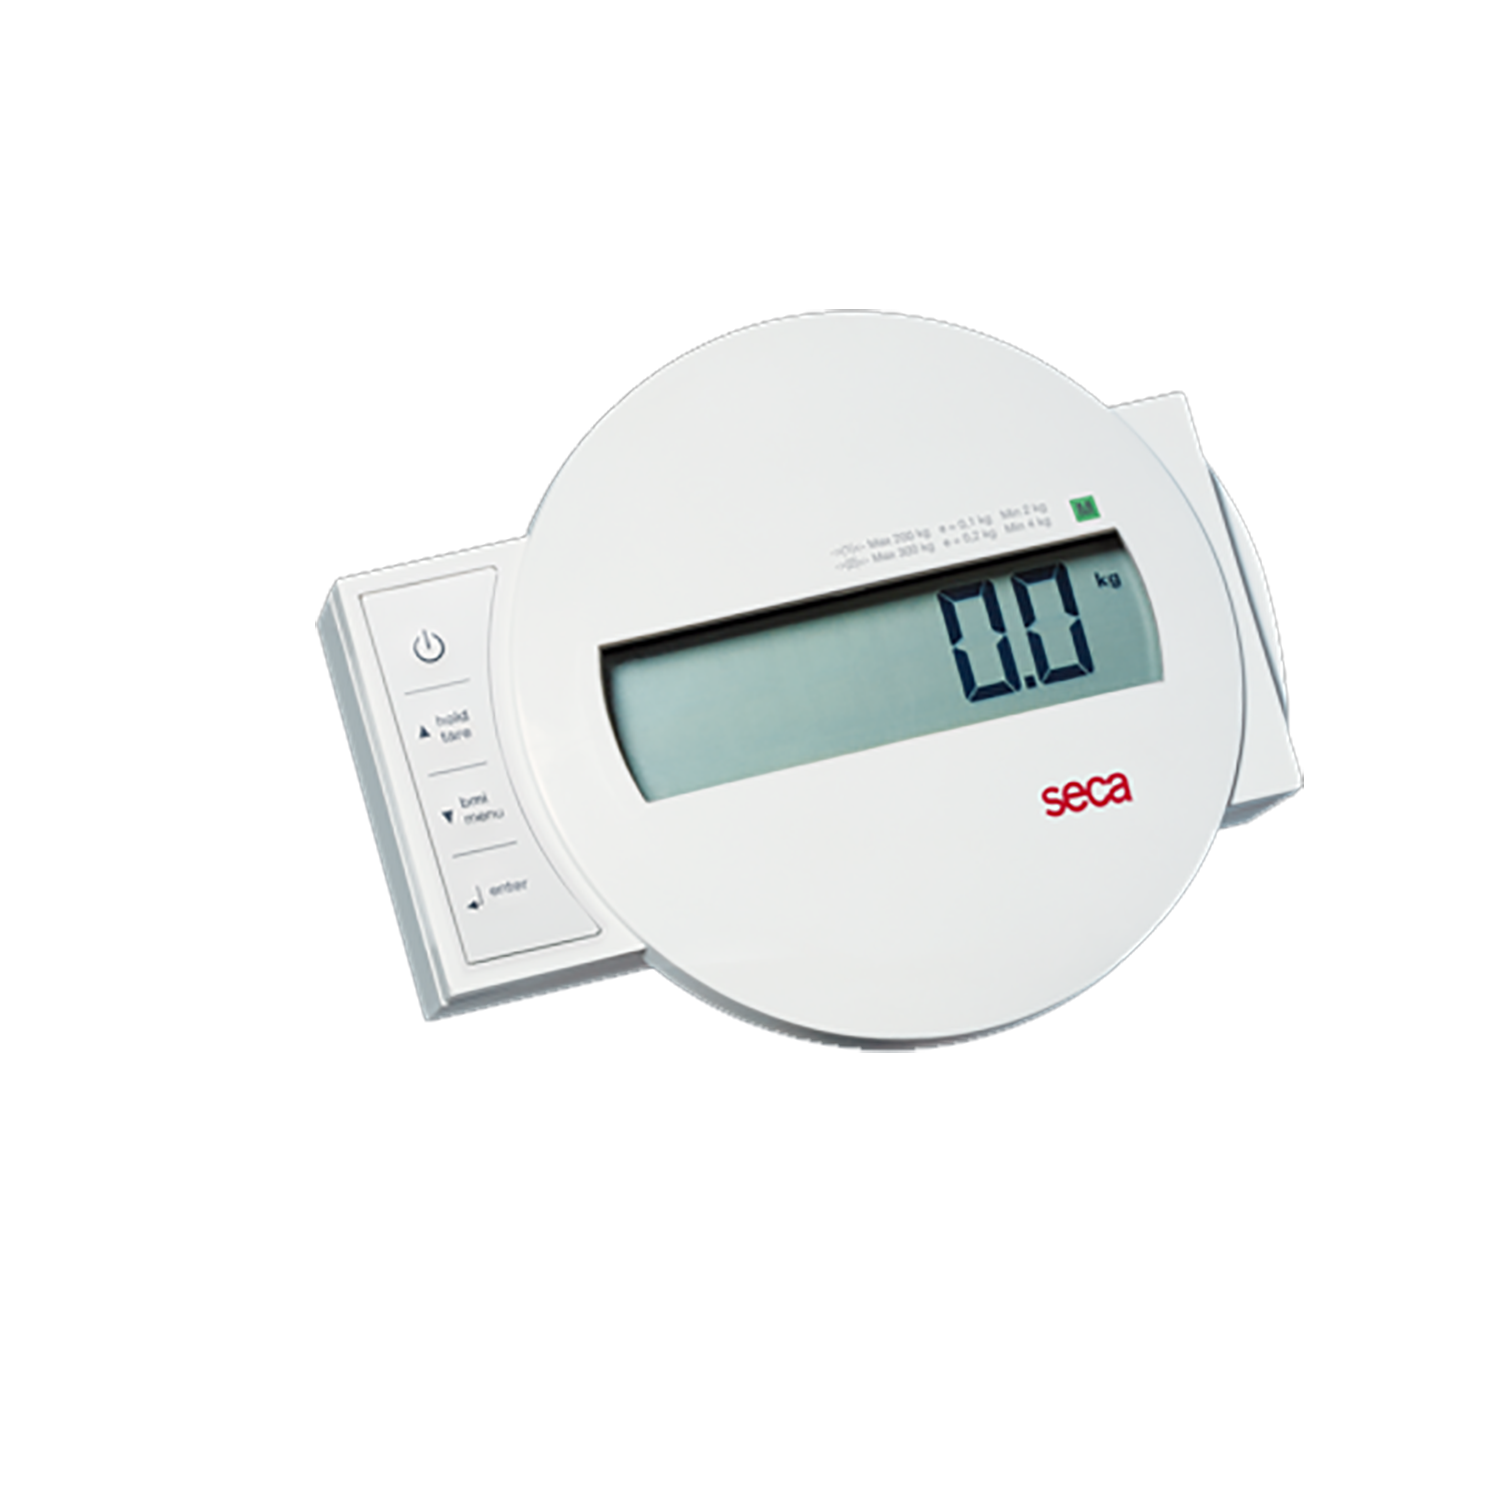 seca 675 Class III High Capacity Digital Wheelchair Scale with remote display, BMI, Wirleless Connectivity (2)